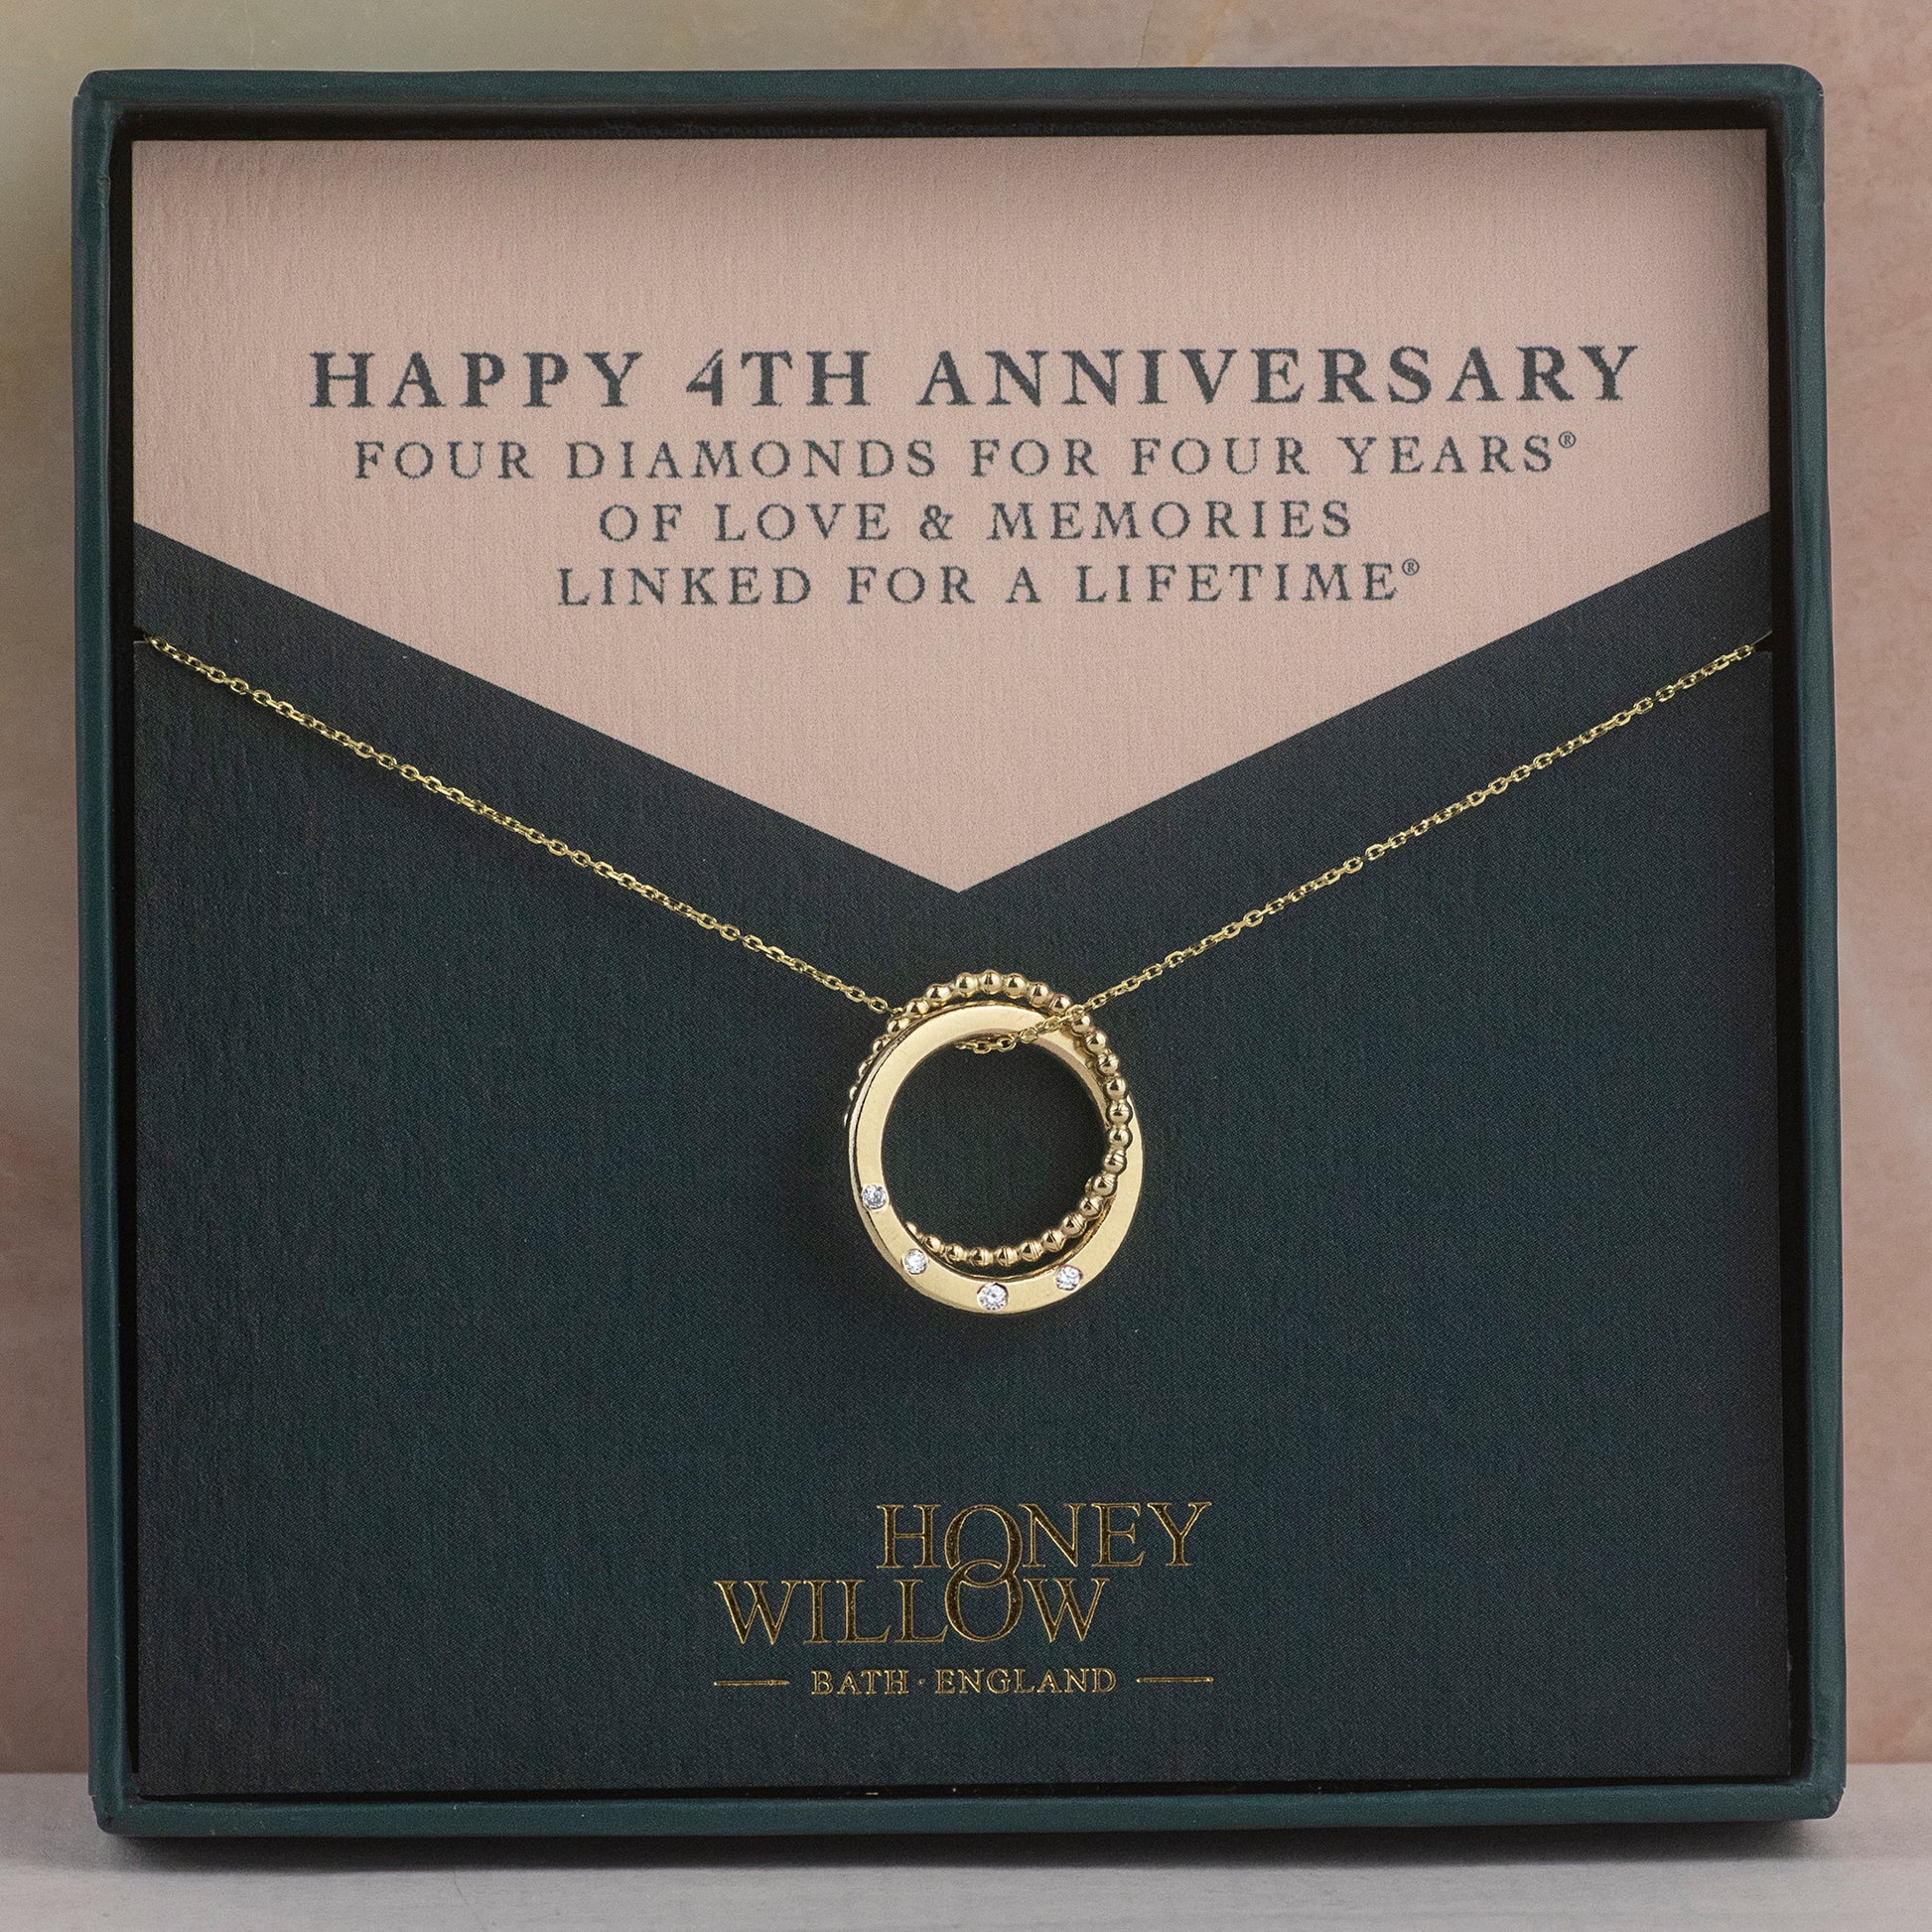 4th Anniversary Necklace - 4 Diamonds for 4 Years - 9kt Gold